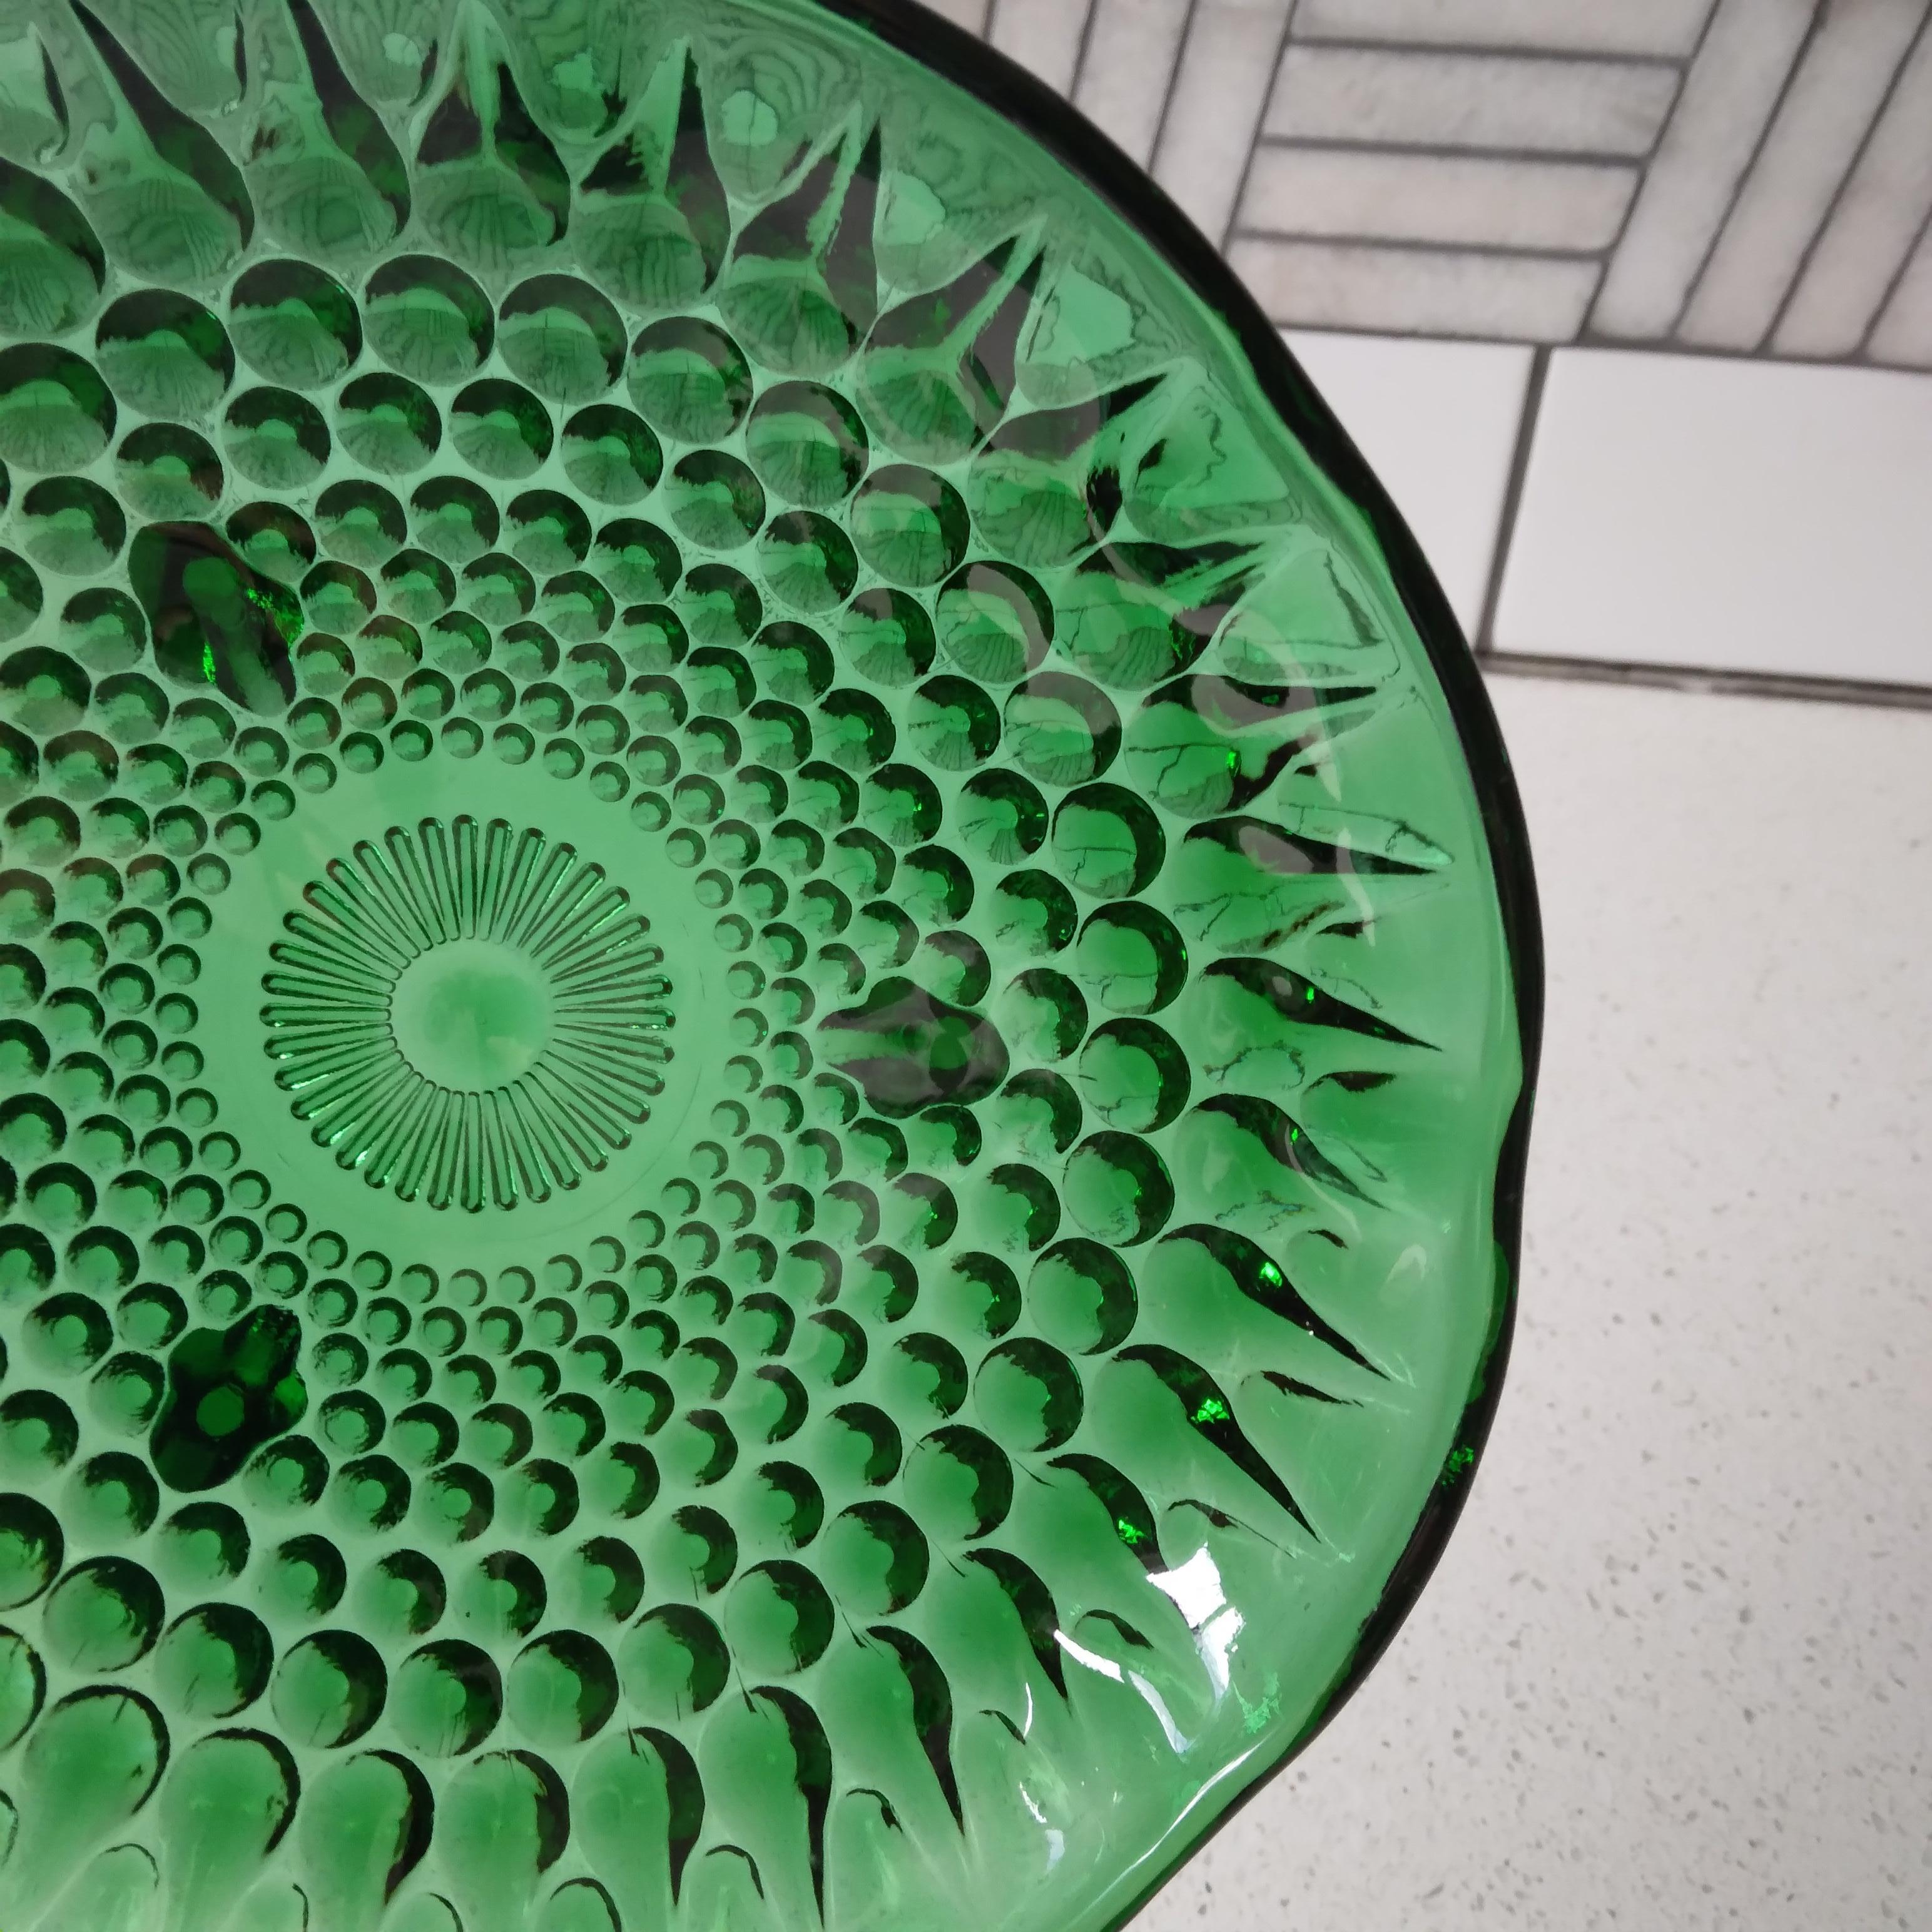 Gorgeous emerald green glass catches and scatters light in a mesmerizing way. We love the chunky hobnail design and quaint feet. The thick walled glass of this vintage piece is in excellent condition for its age.